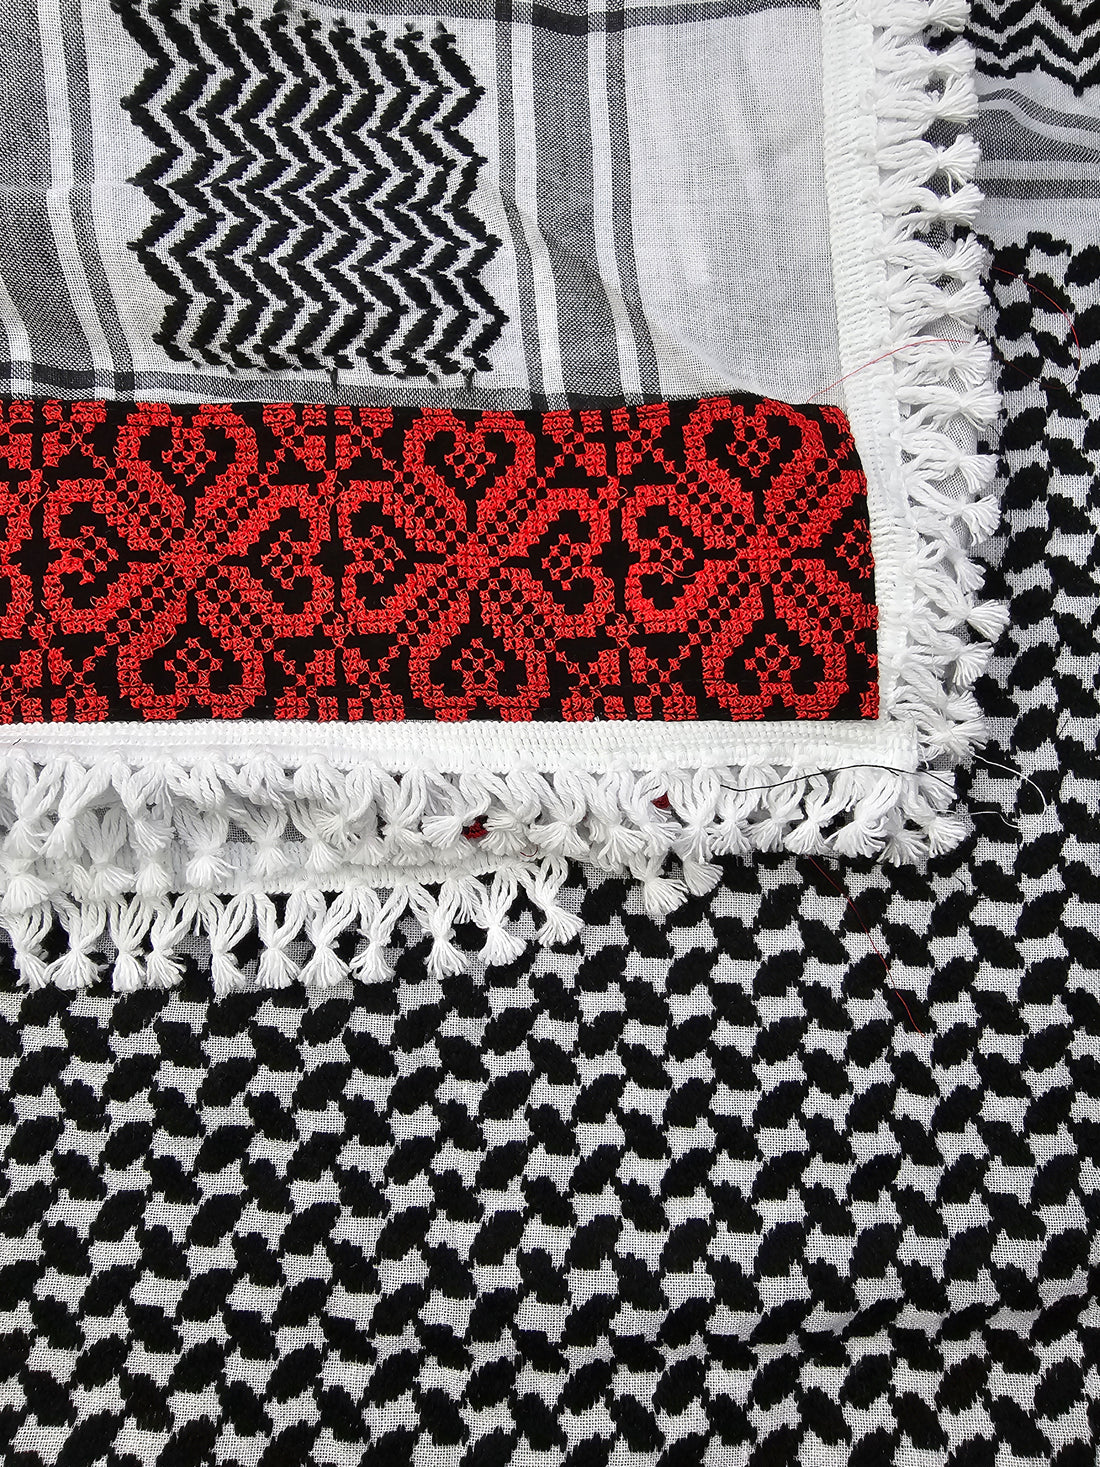 red black and white embroidered keffiyeh